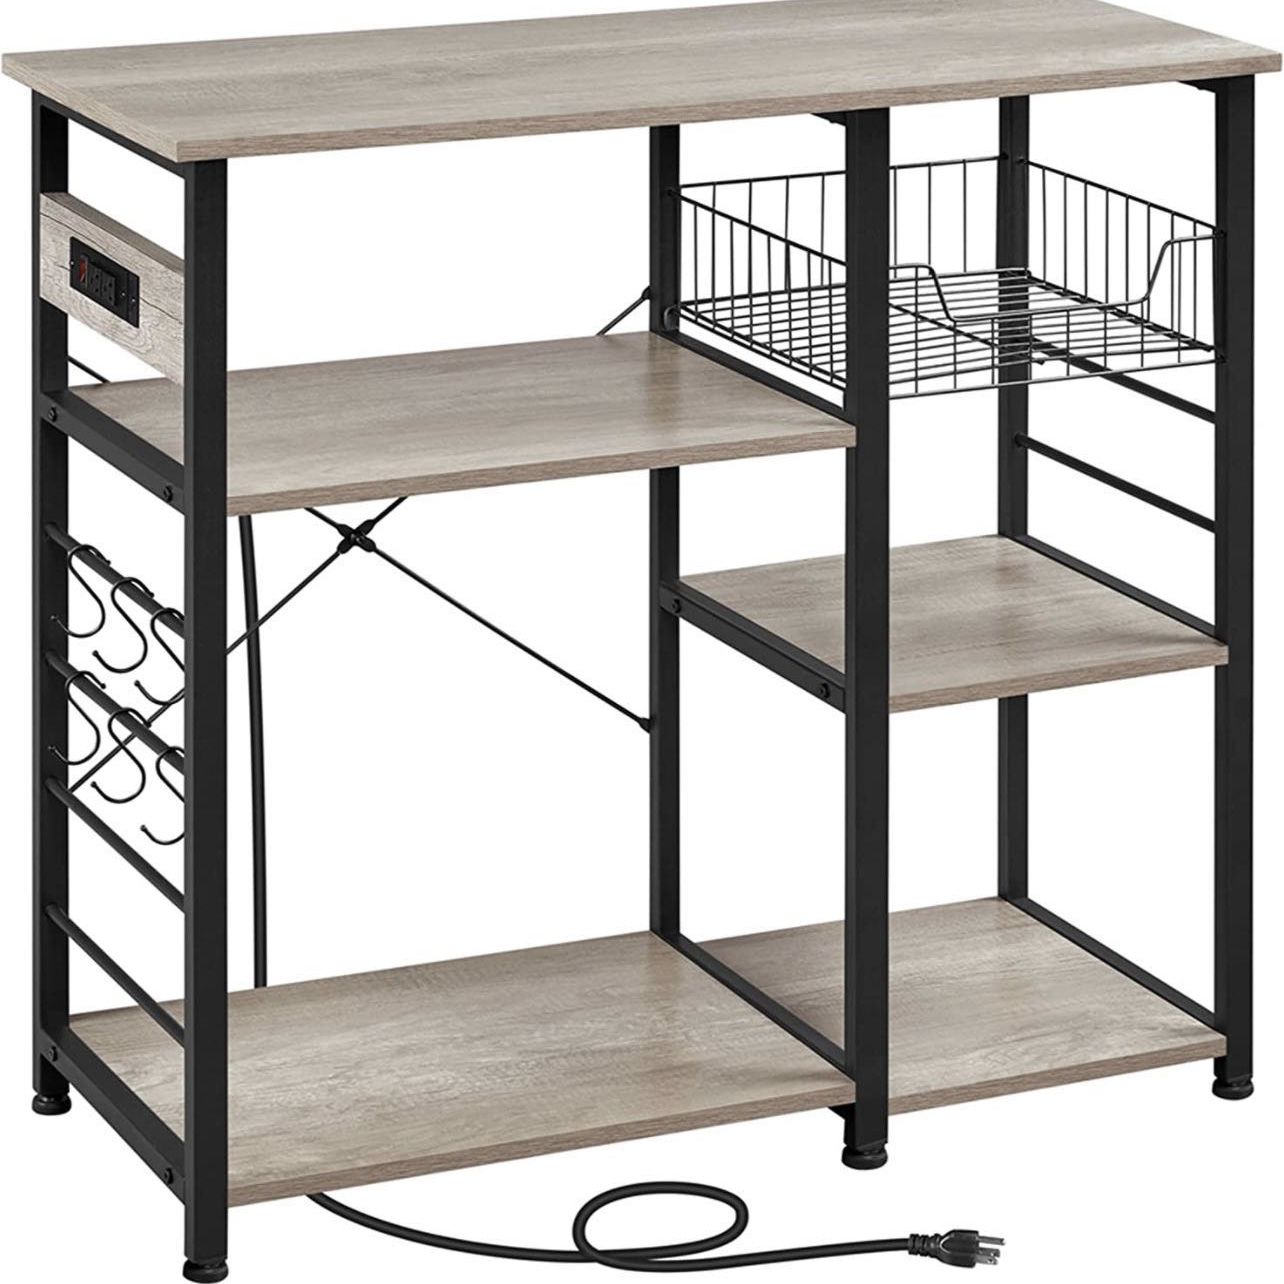 4-Tier Baker's Rack with Power Outlet, Microwave Stand Coffee Bar with Wire Basket and 6 S-Shaped Hooks, Durable Kitchen Storage Shelf Ample Storage K